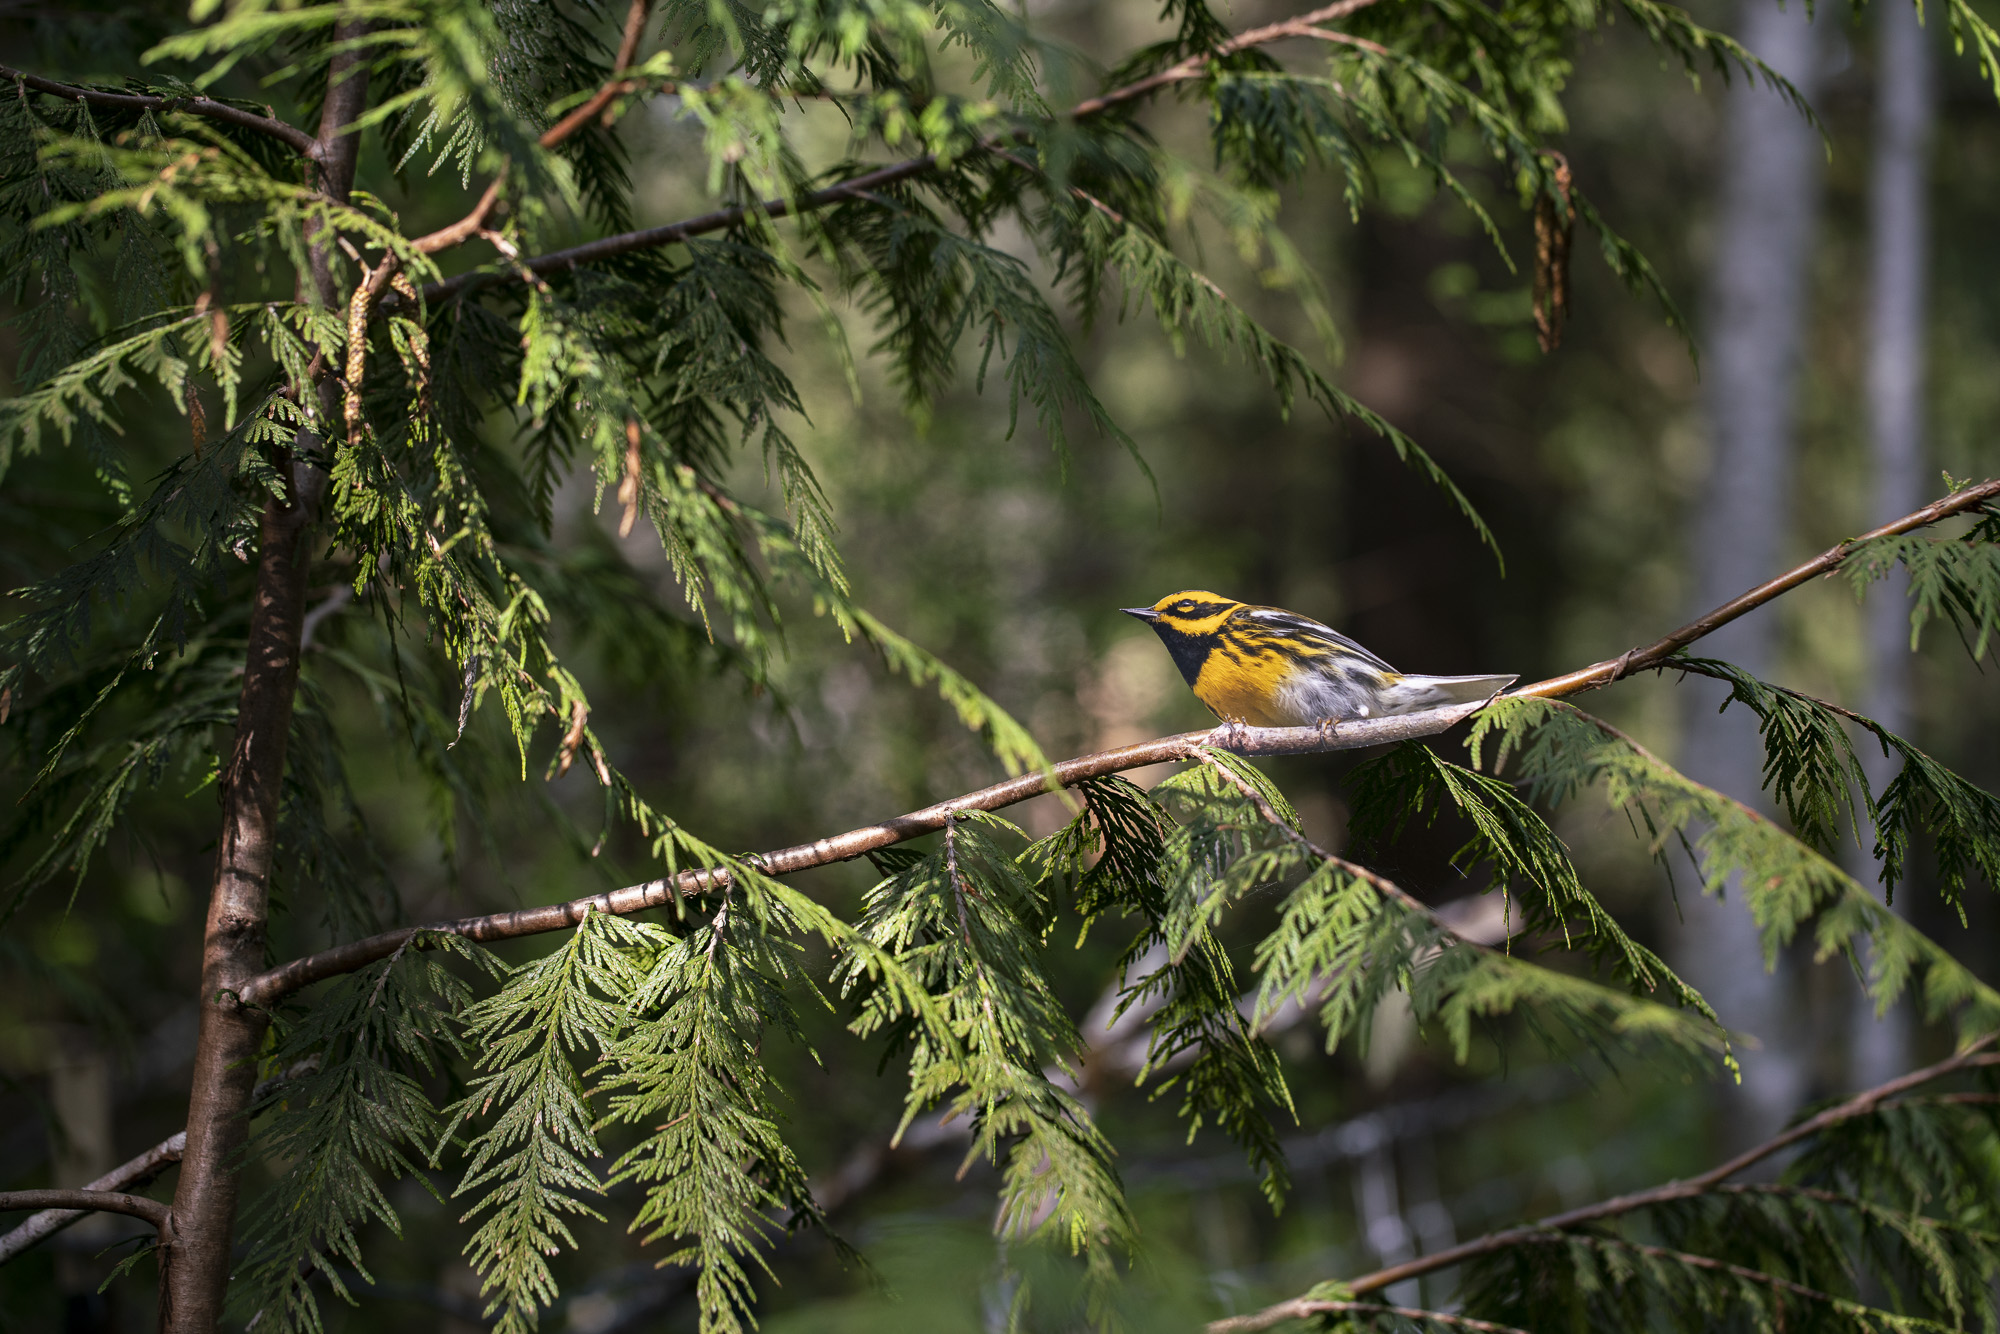 A cutout of a photograph of a Townsend’s Warbler bird in an cedar tree with the sun shining down on the scene.